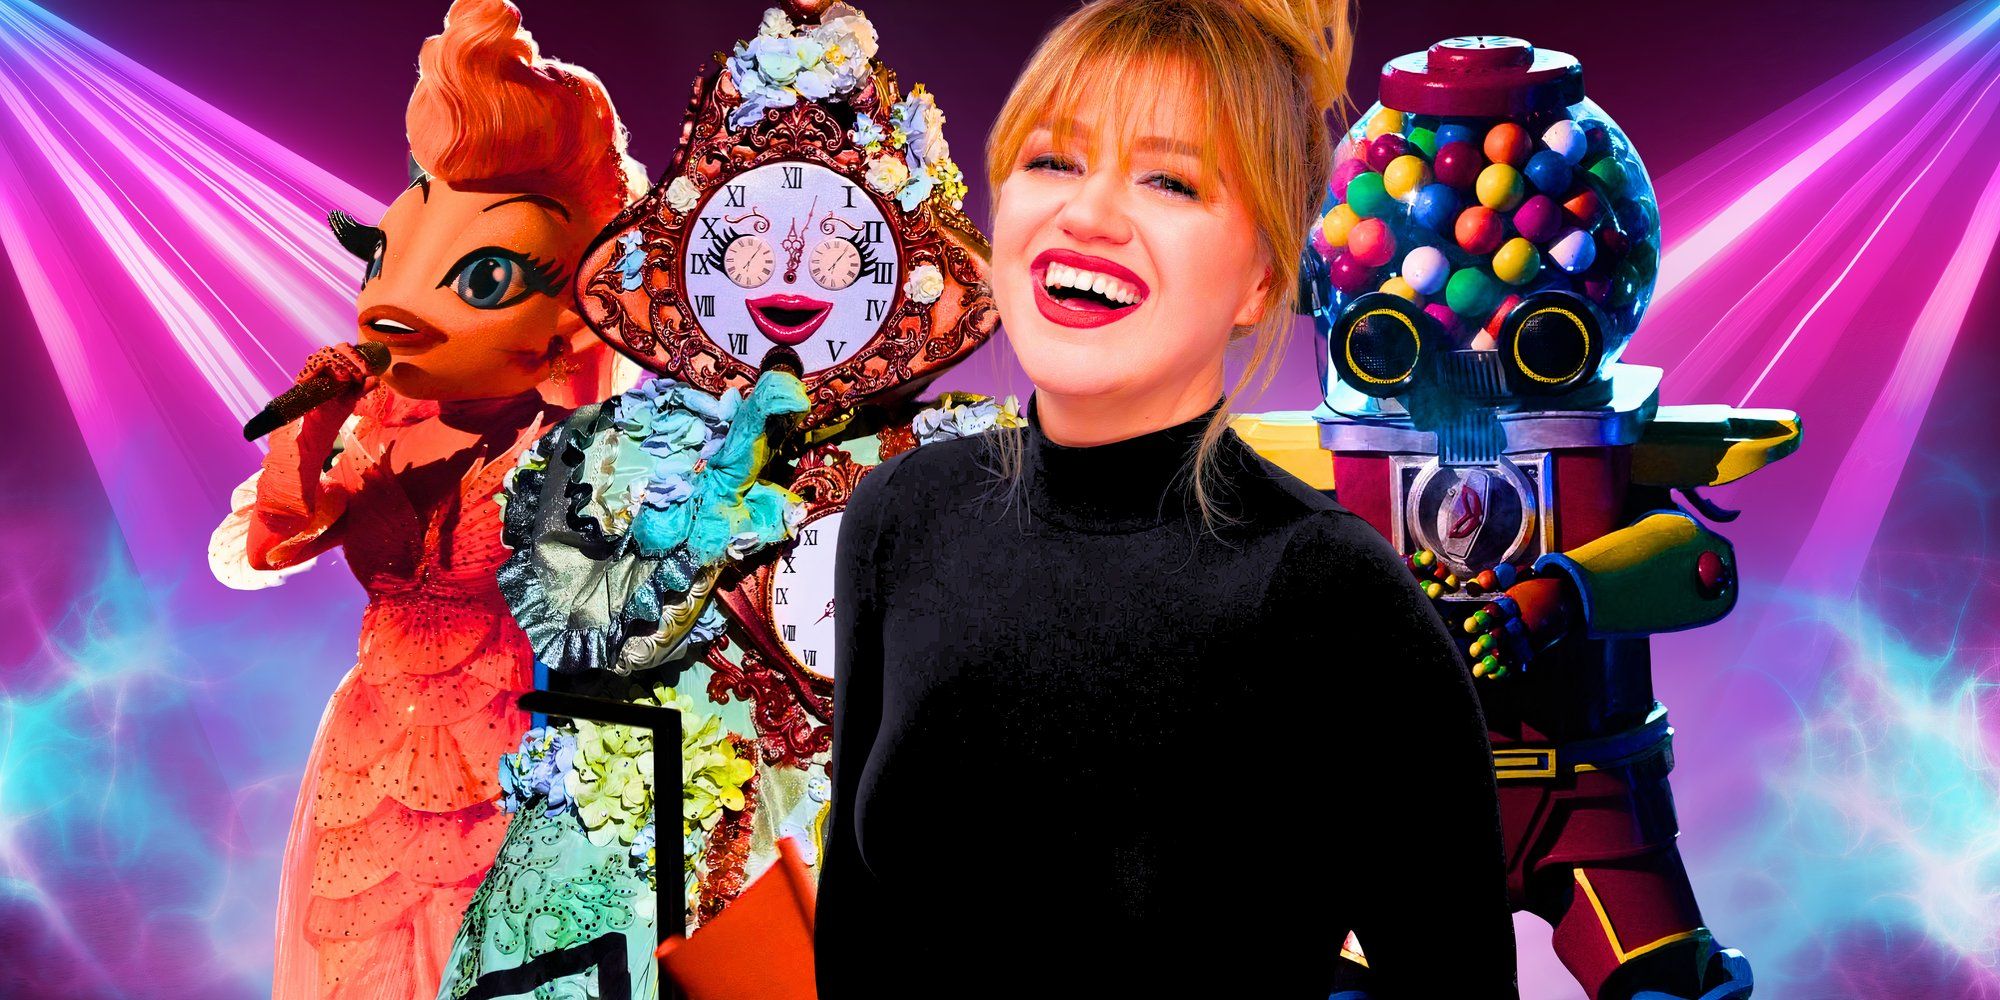 Kelly Clarkson smiles, and The Masked Singer's Goldfish, Clock and Gumball perform behind her.